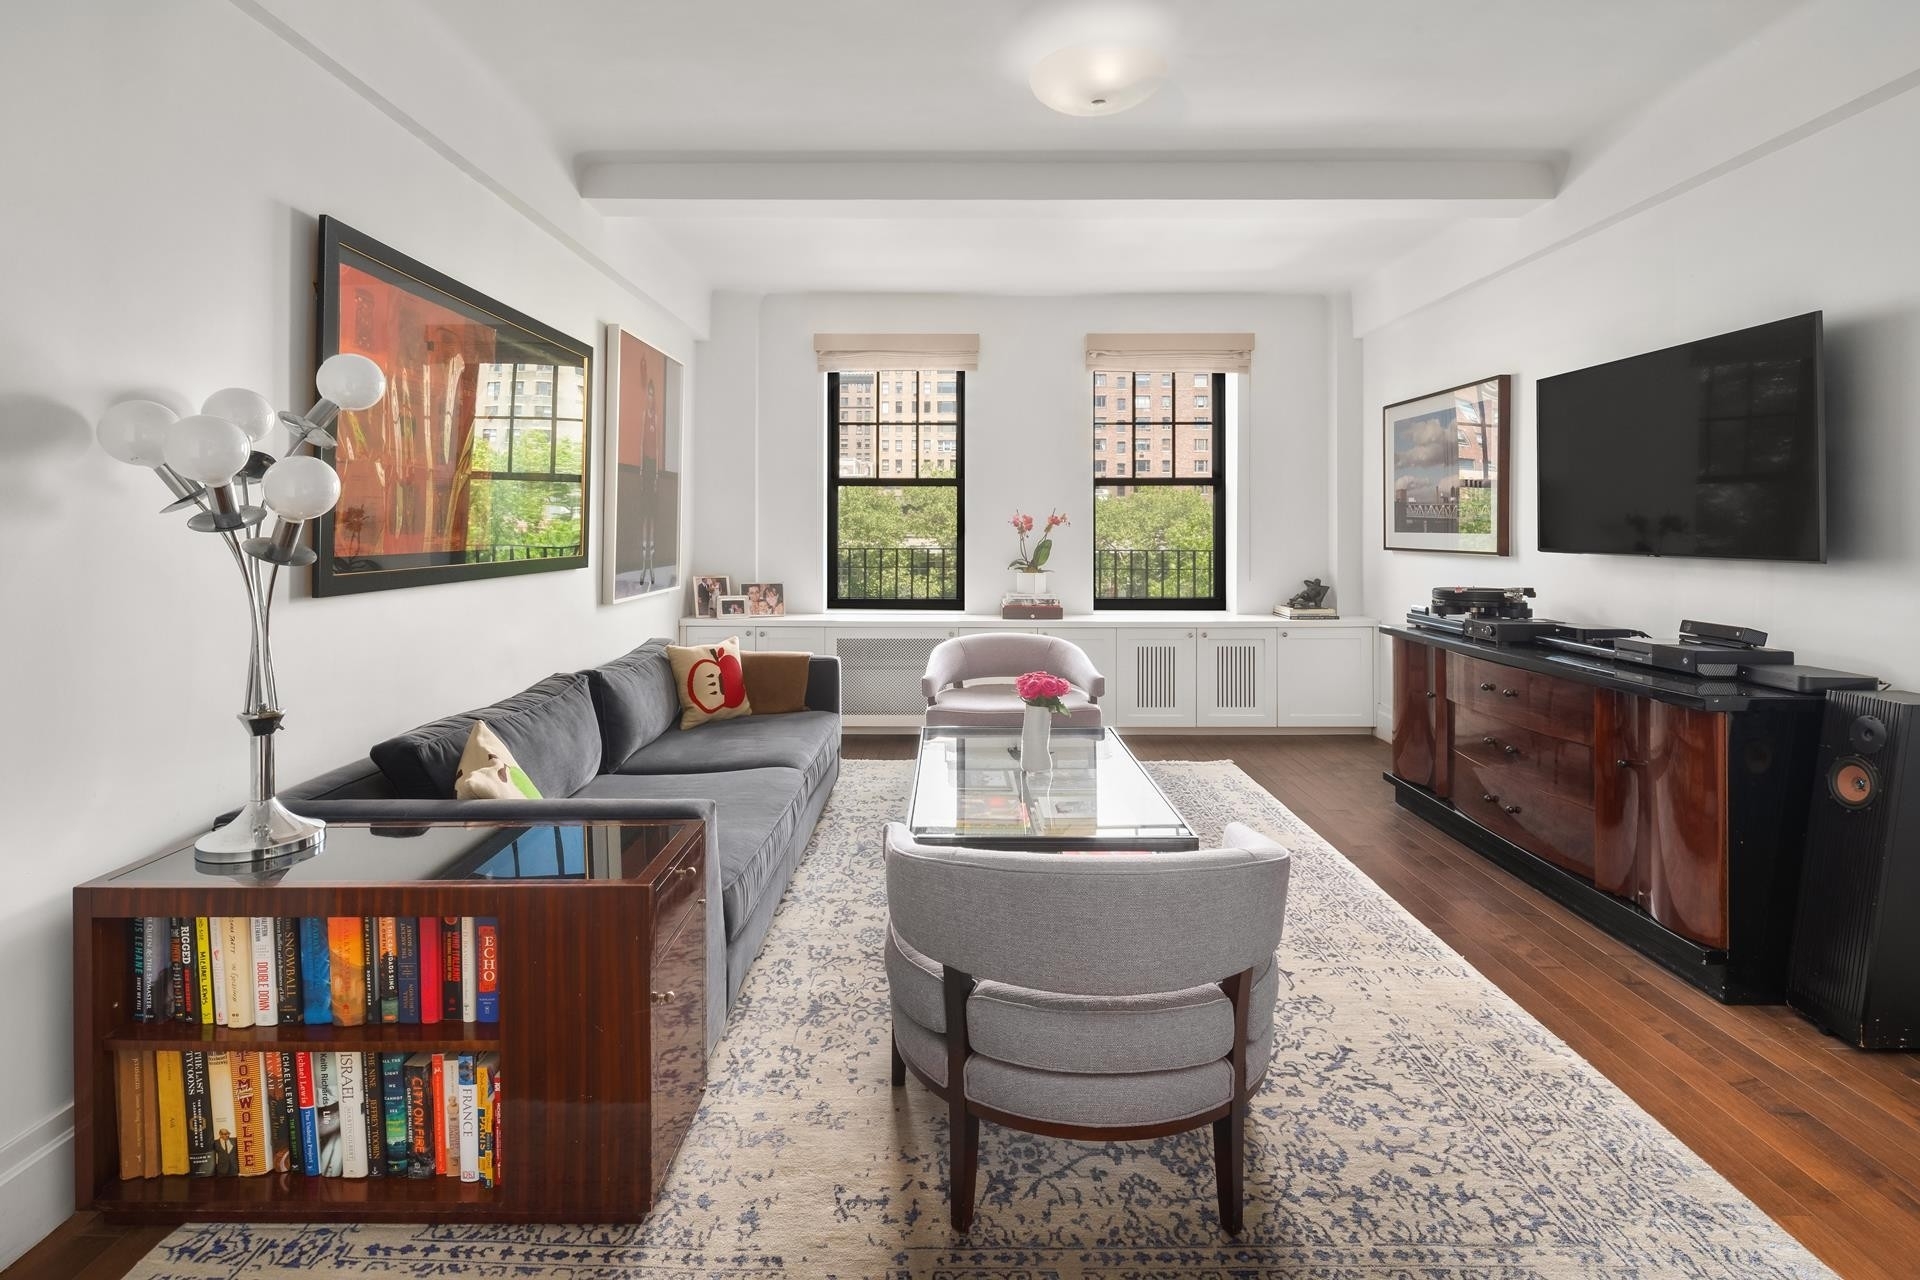 Co-op Properties for Sale at 160 W 77TH ST, 5B Upper West Side, New York, NY 10024